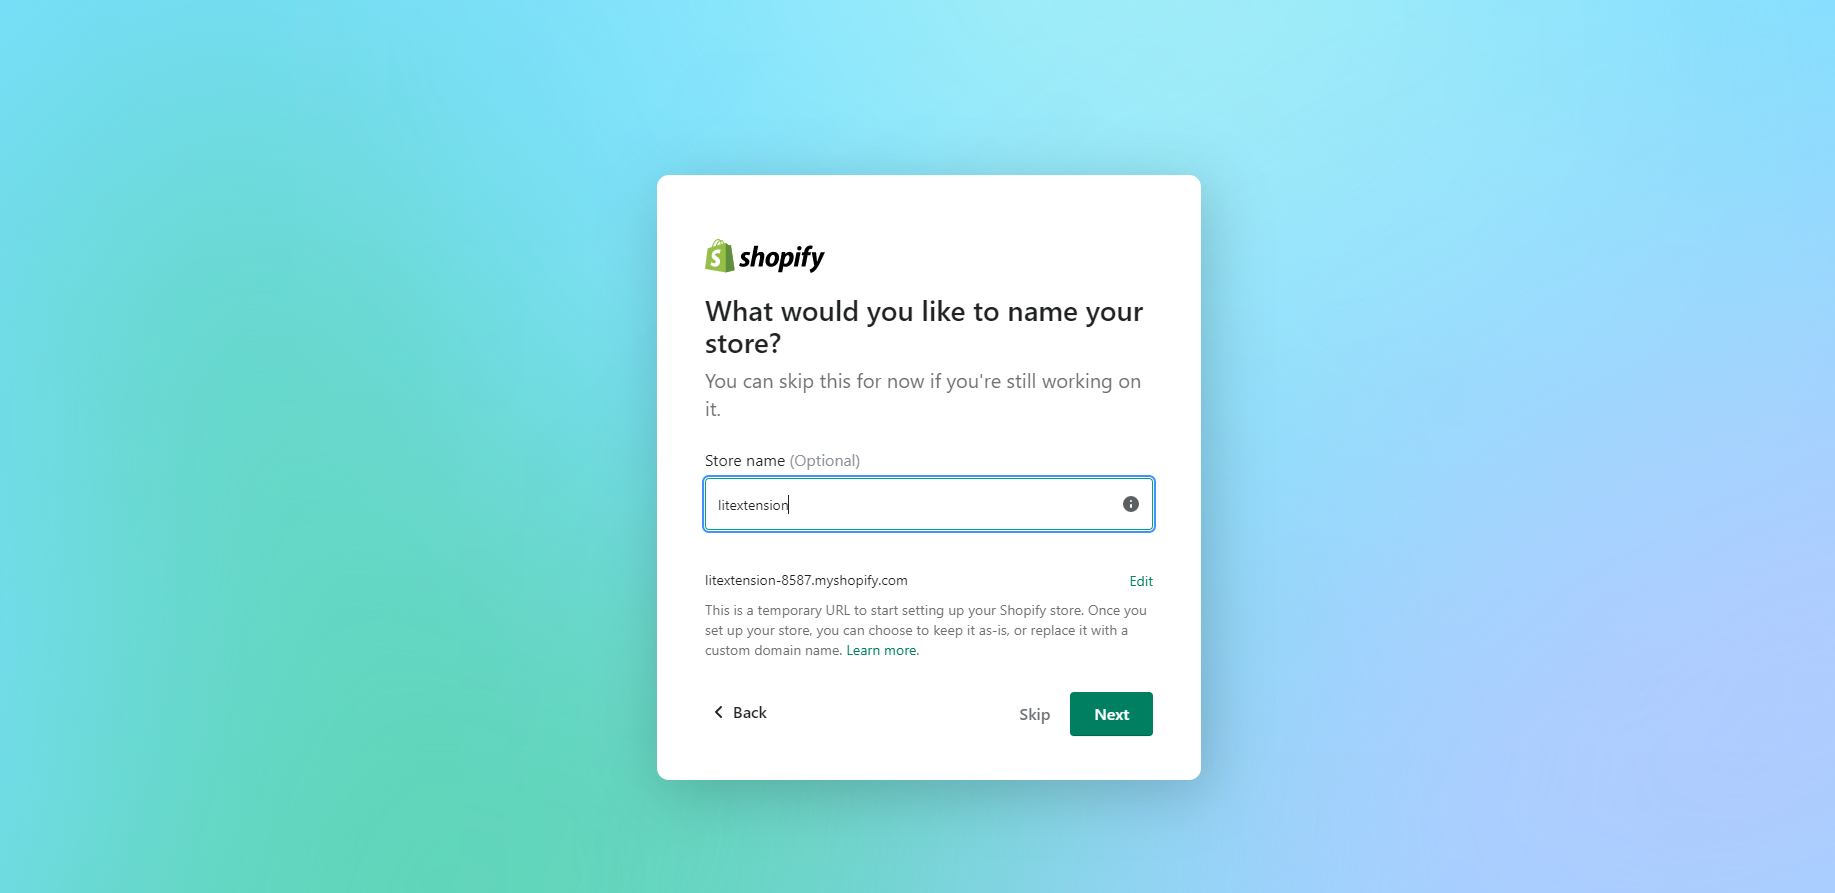 provide Shopify with your store's name